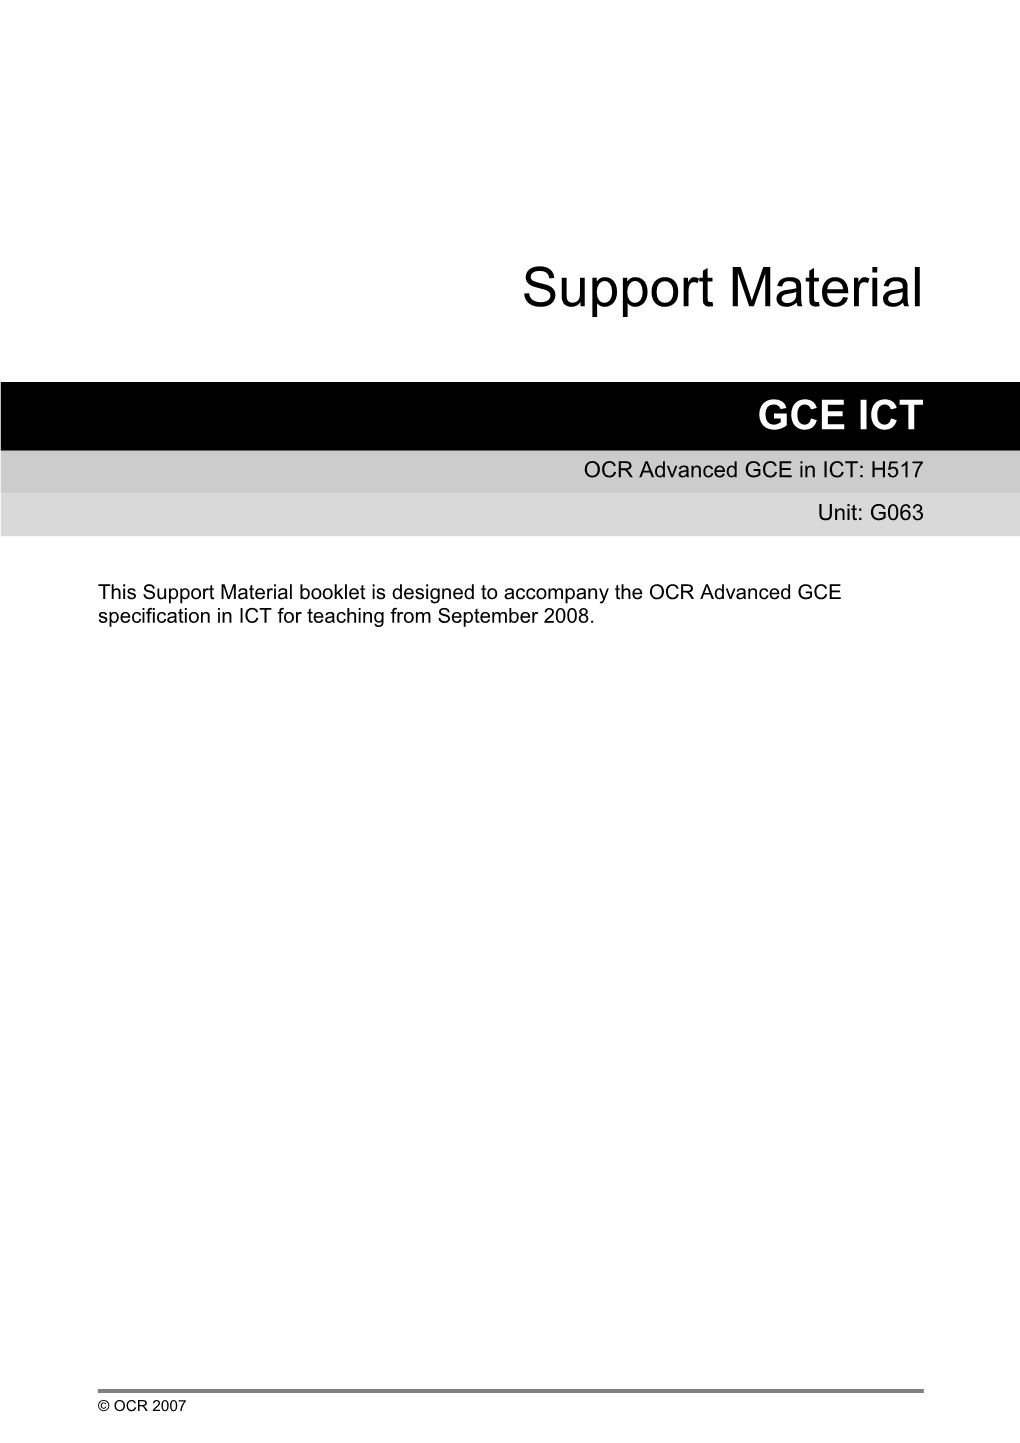 OCR Advanced GCE in ICT: H517